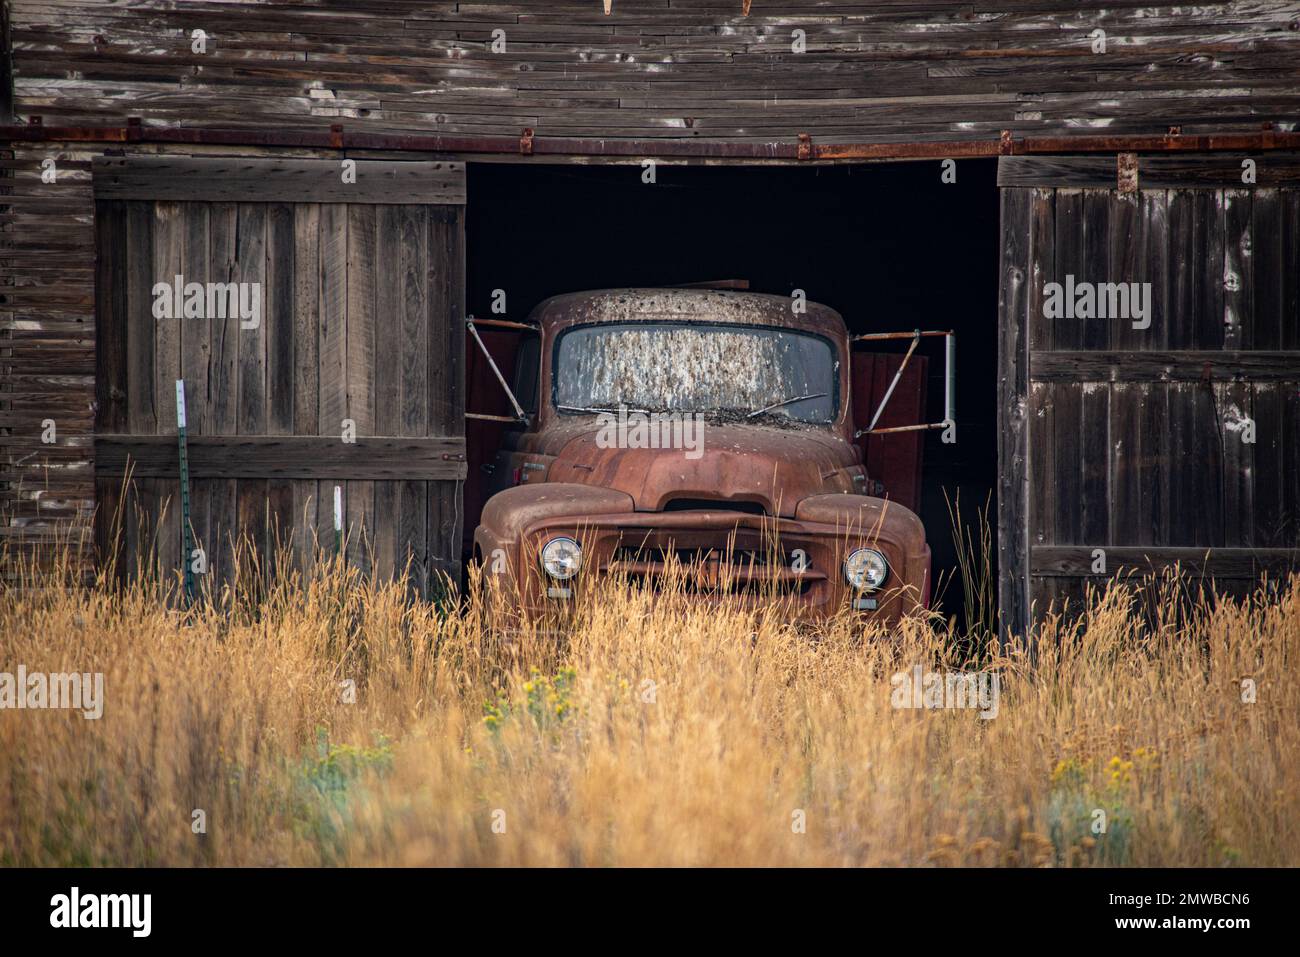 An old rusty Ford truck parked inside a wooden garage surrounded by golden grass Stock Photo